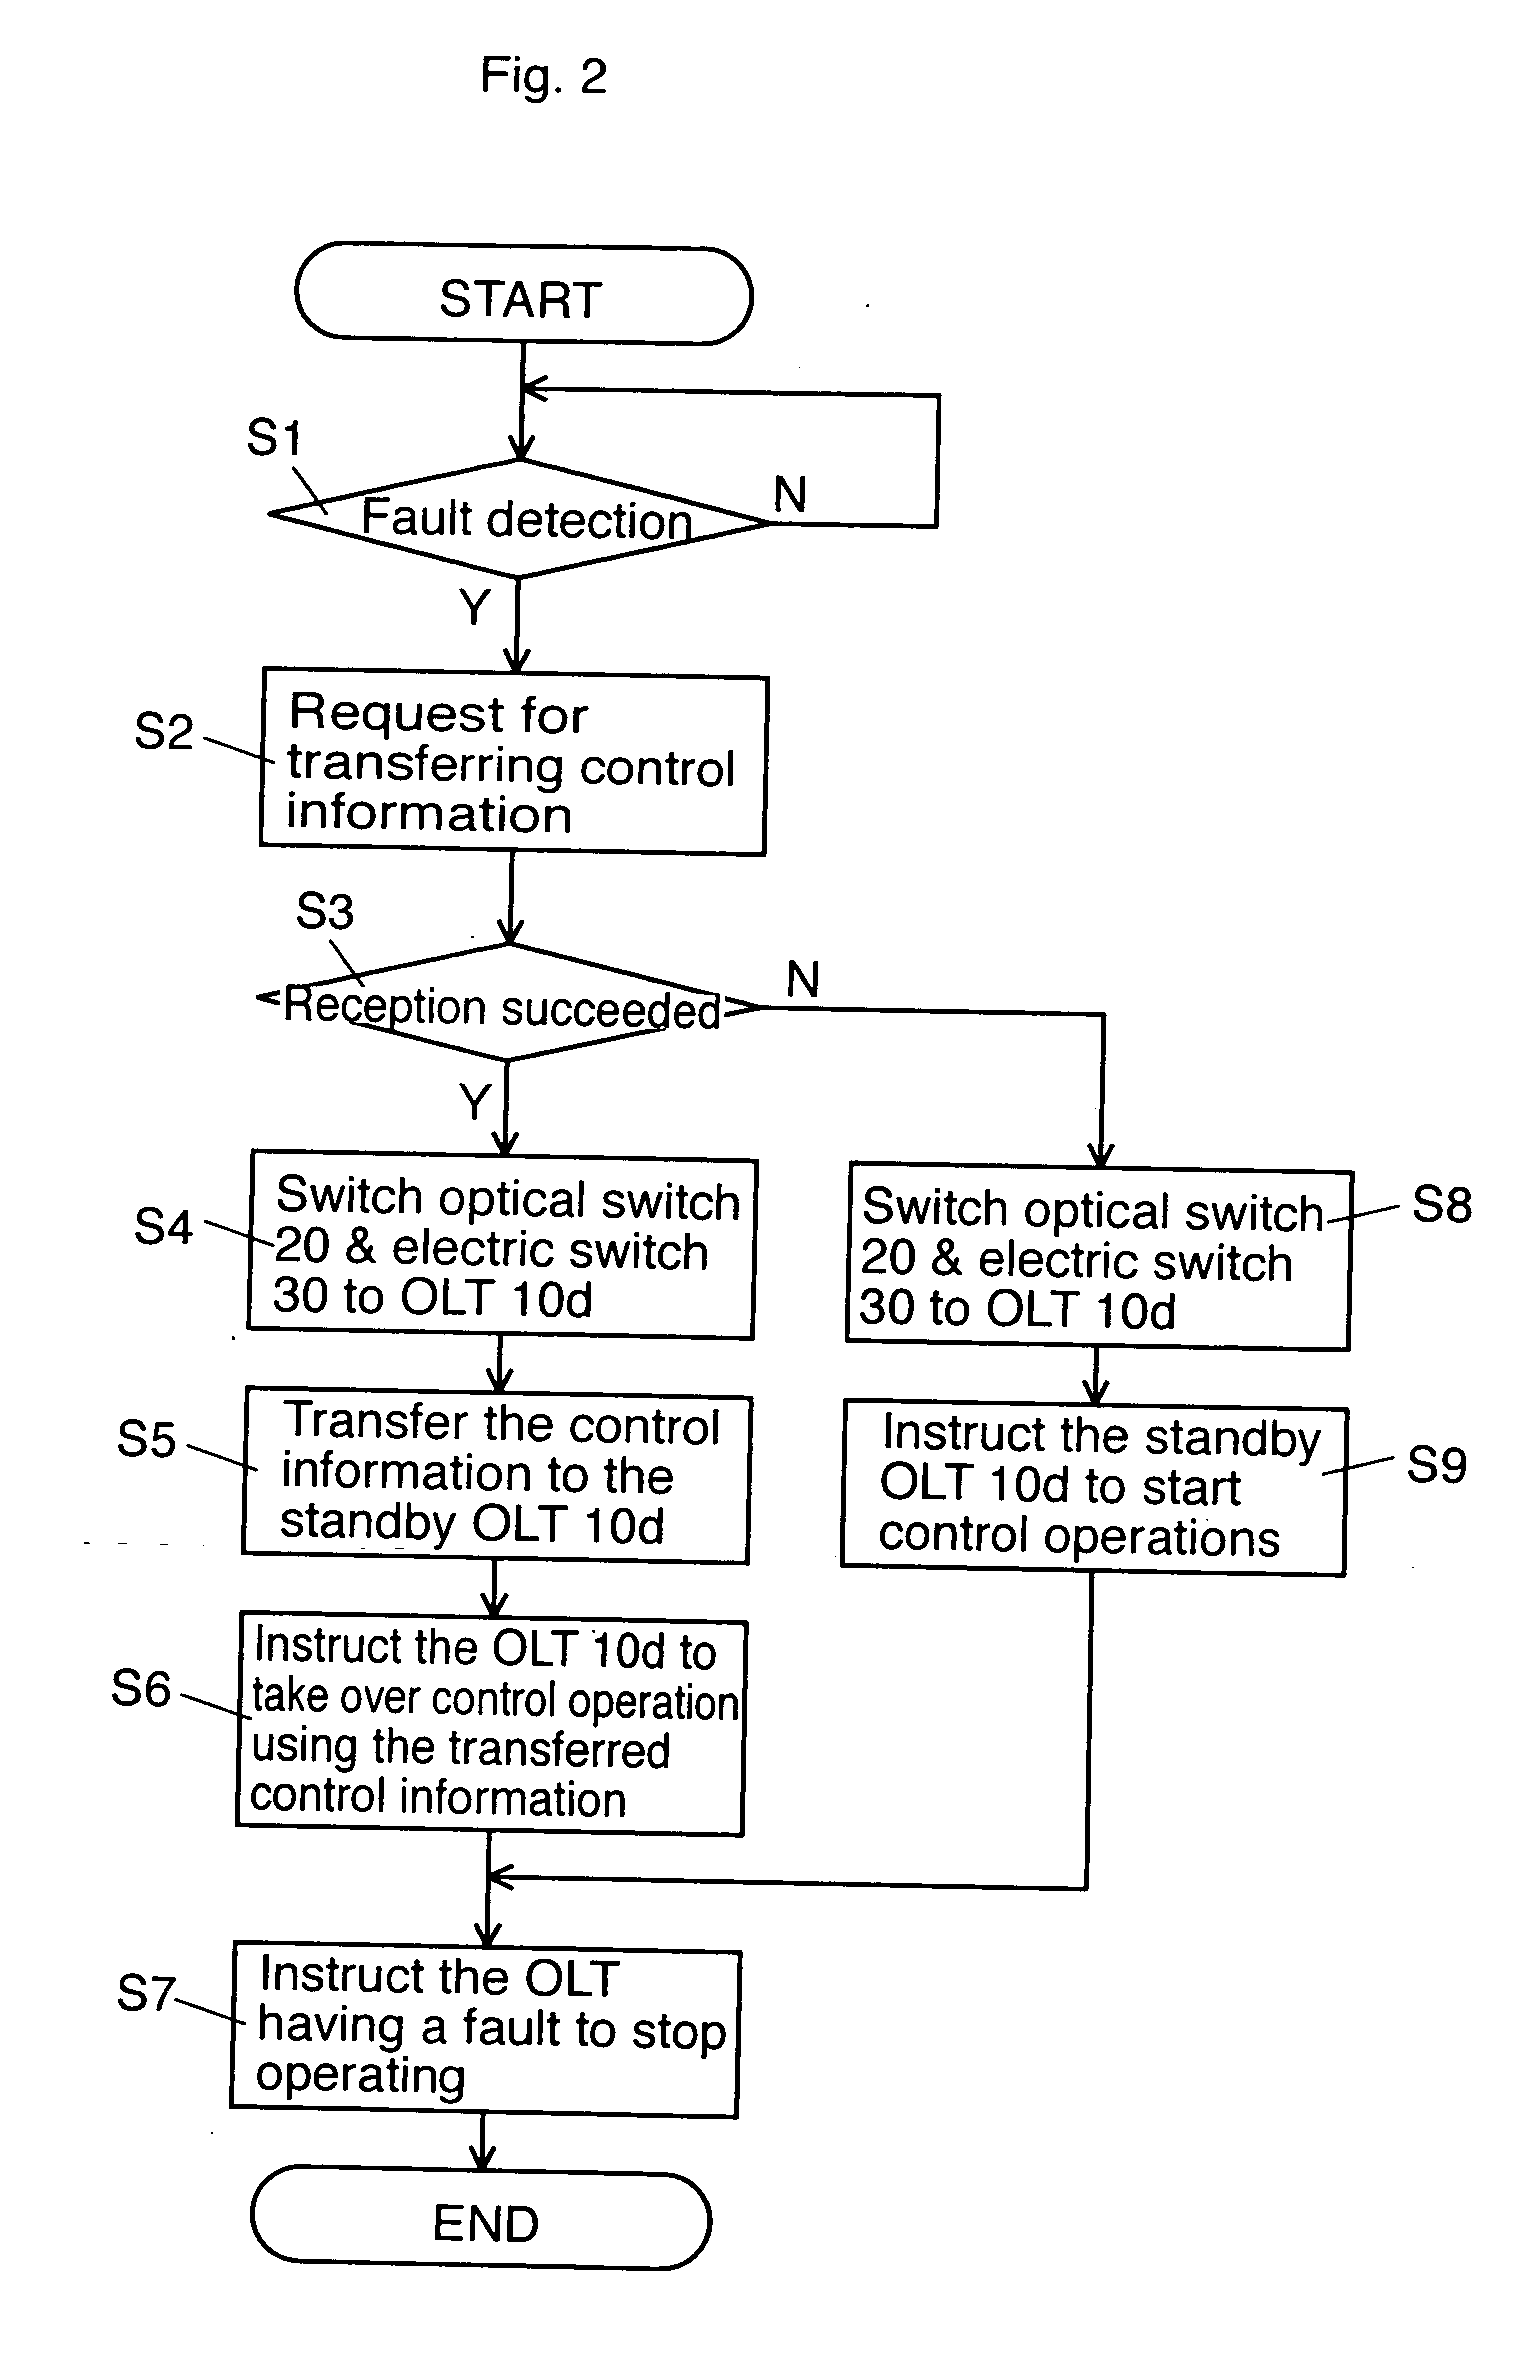 Optical termination system